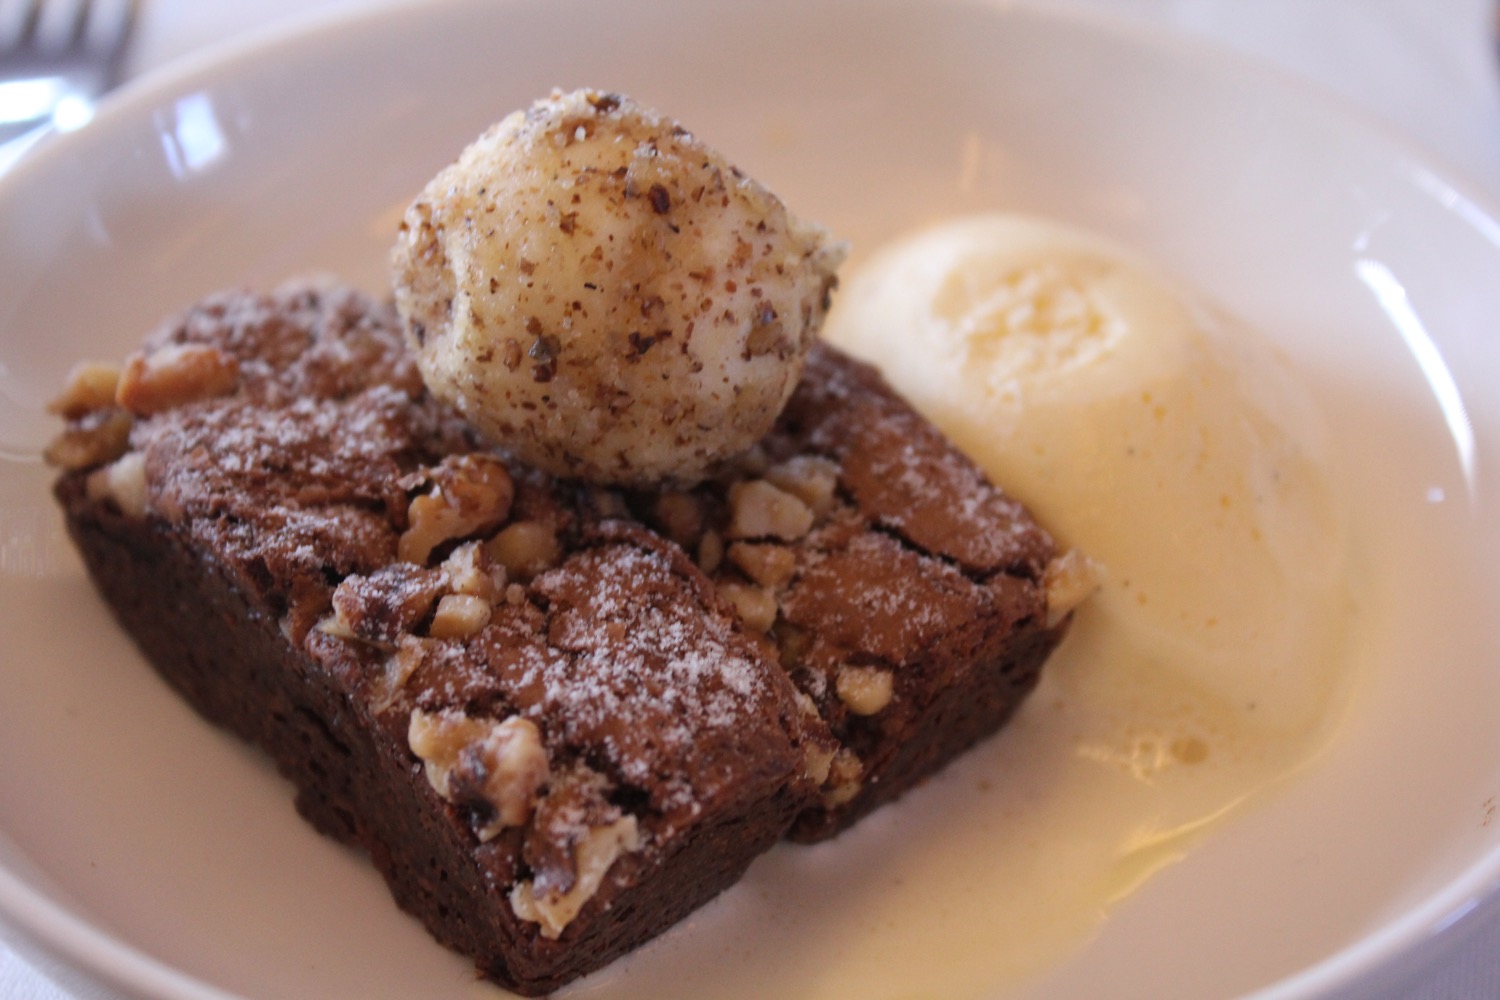 a brownie and ice cream on a plate